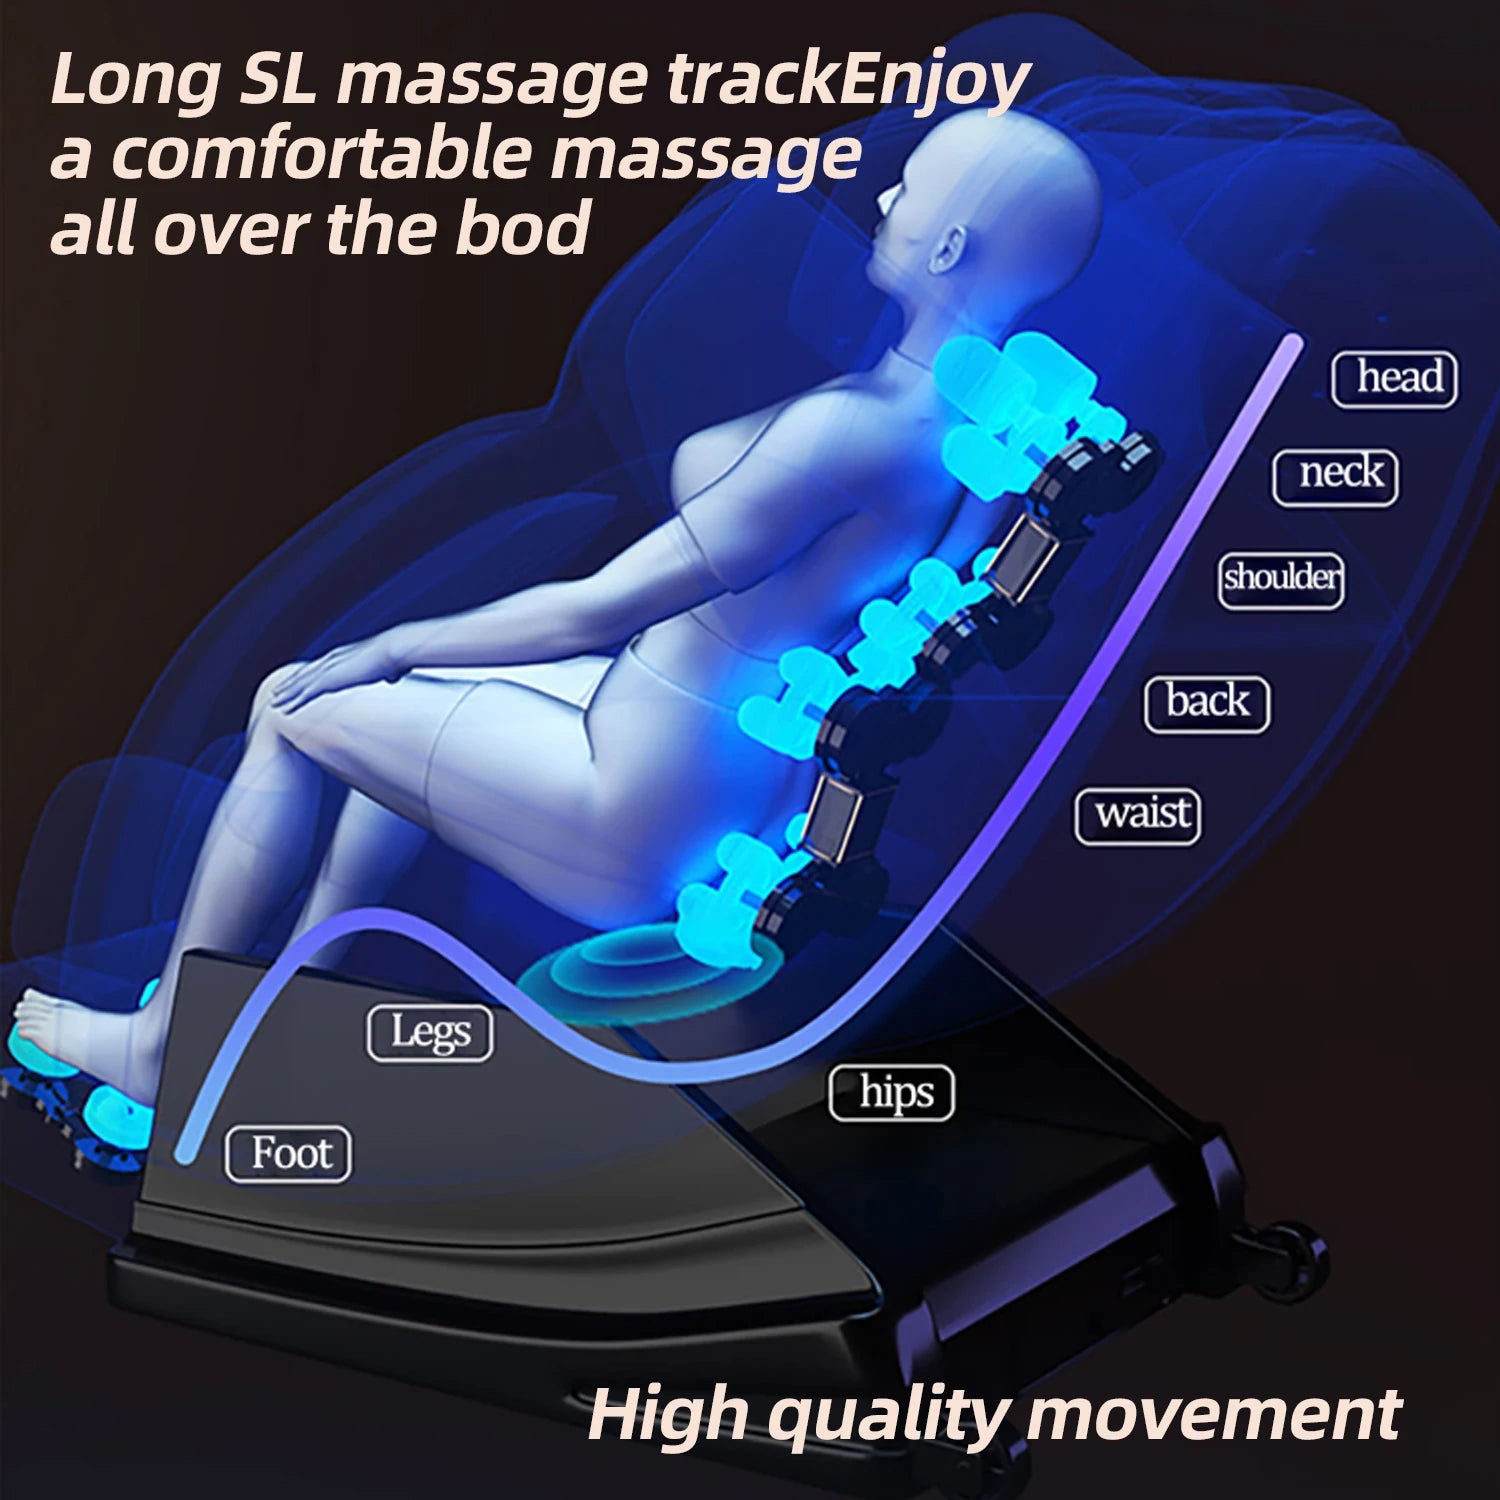 Newest Full Body 4D Electric Luxury Massage Chair Deluxe Zero-gravty Jade Massage Chair Sofa Home Office Furniture Recliner